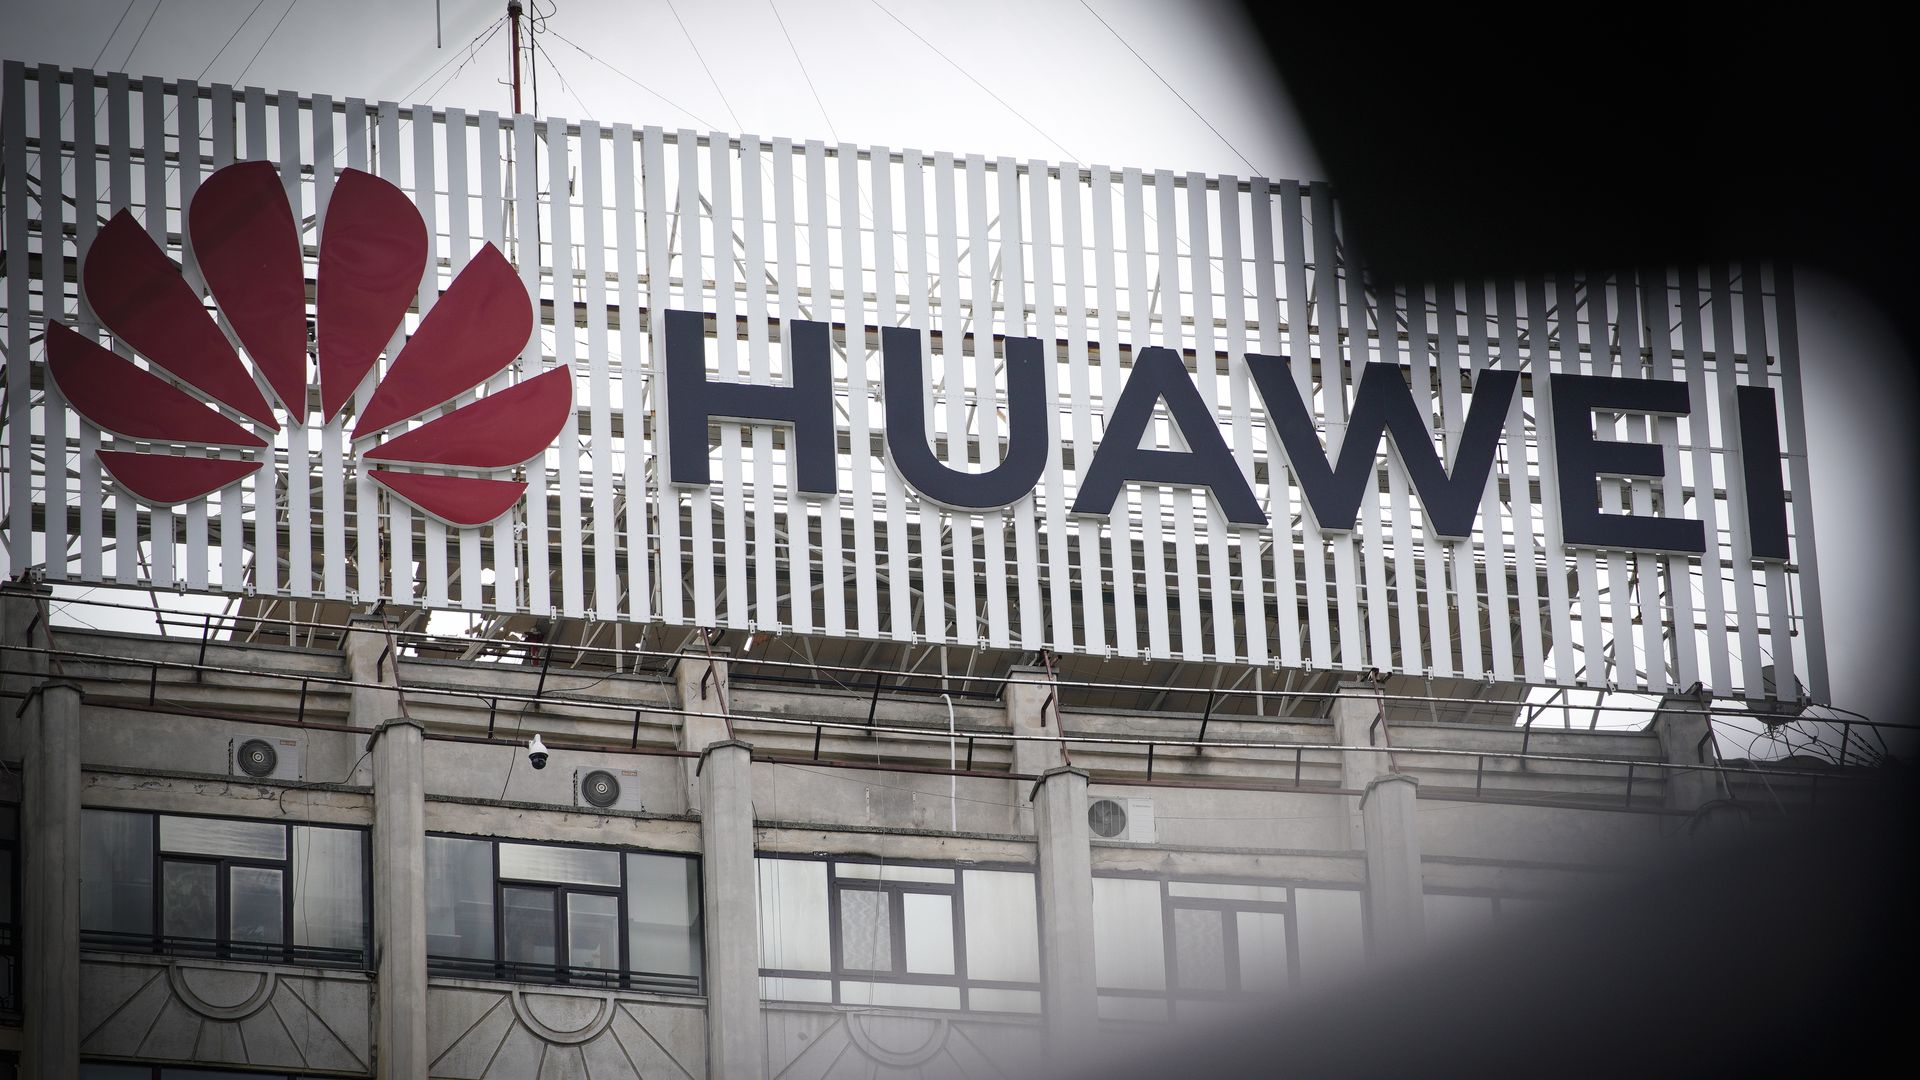 In this image, the Huawek logo is seen on the side of a building on a foggy day.